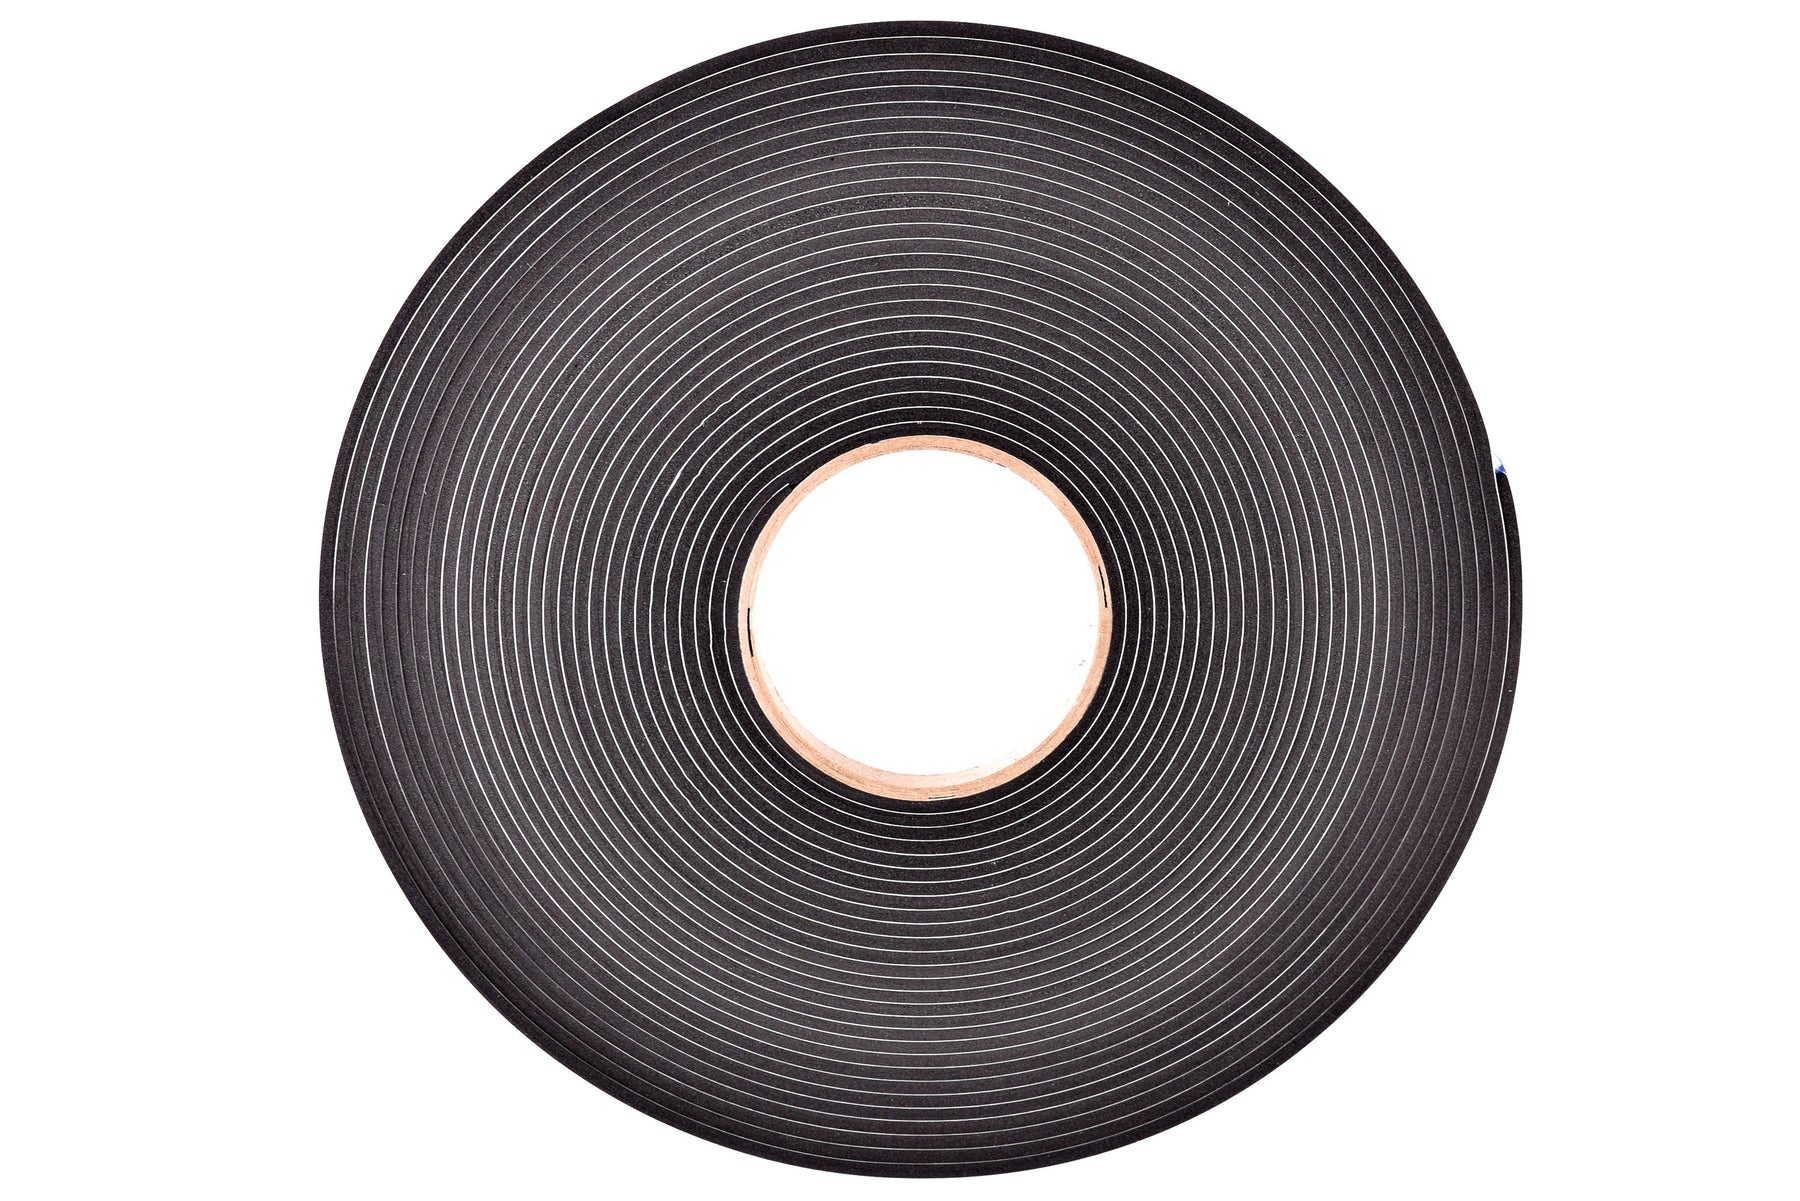 Sponge Neoprene Stripping W/Adhesive 3/8in Wide X 1/8in Thick X 50ft Long